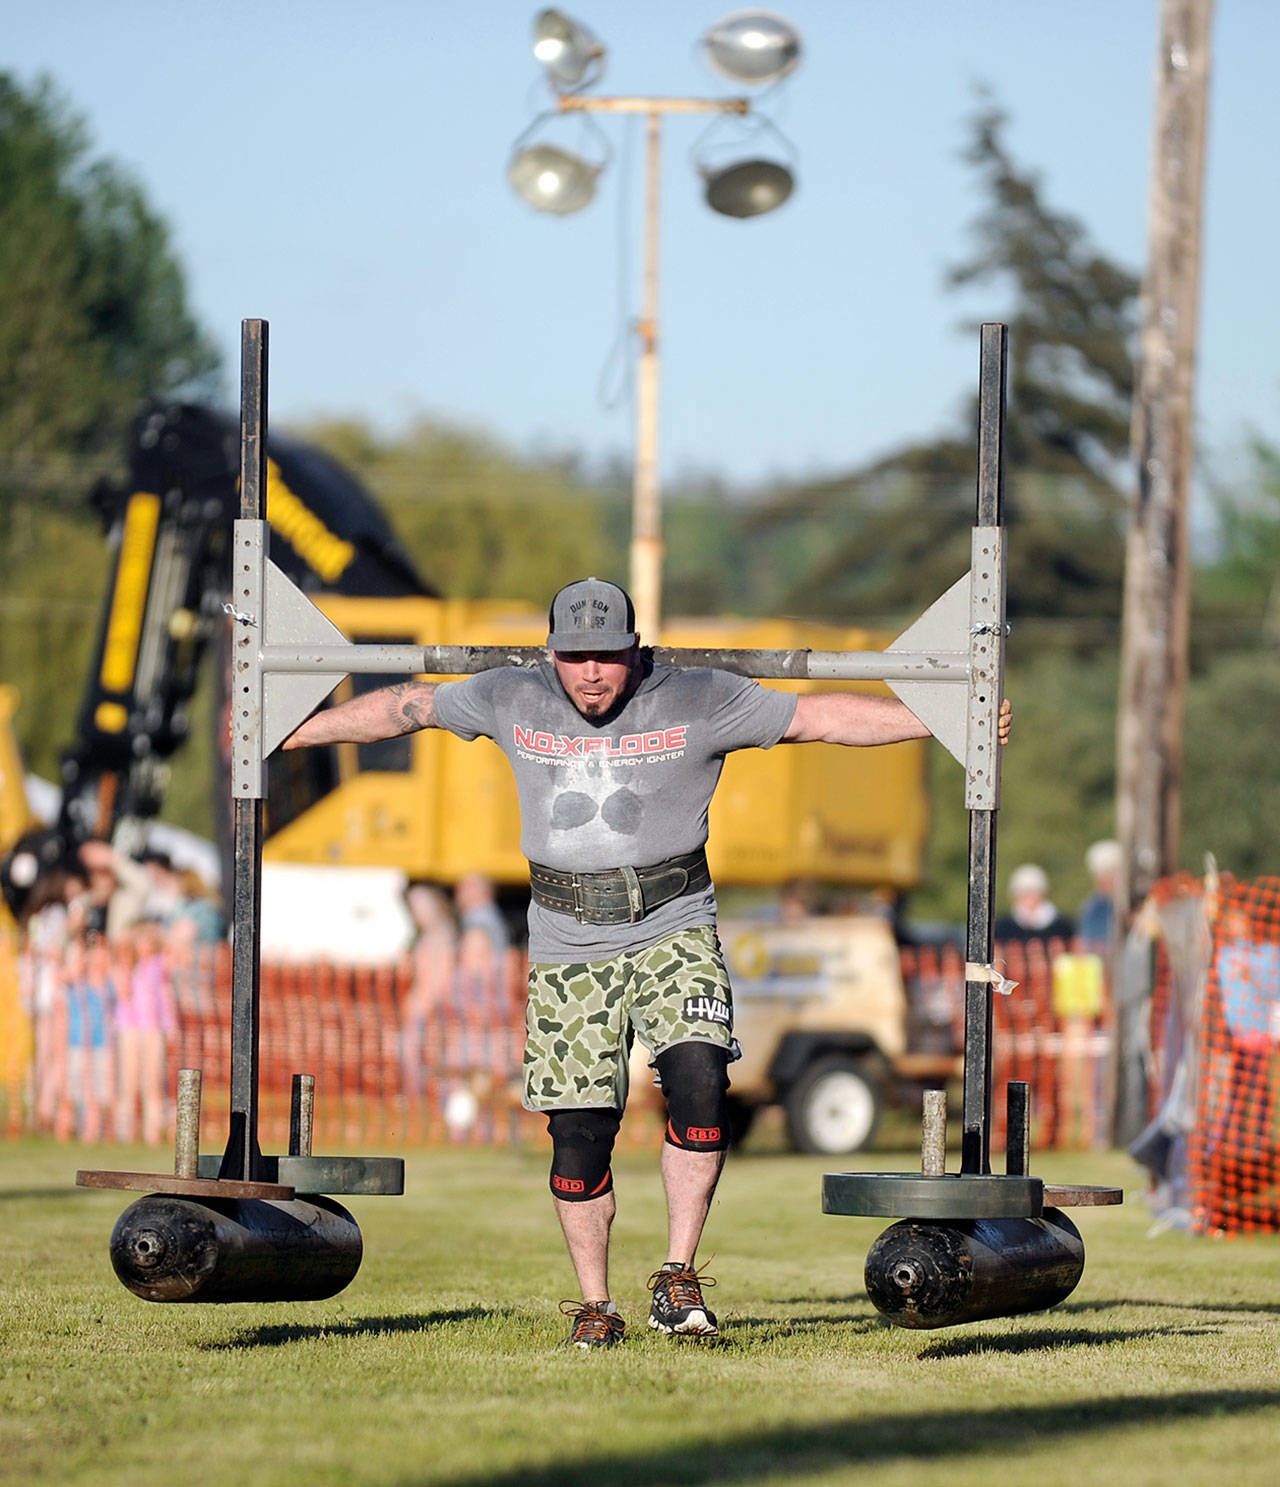 Nate Bolling of Sequim competes in the yoke walk portion of the Sequim Irrigation Festival Strongman Competition, held Saturday Night on the grounds of the 30th-annual Logging Show. (Michael Dashiell/Olympic Peninsula News Group)